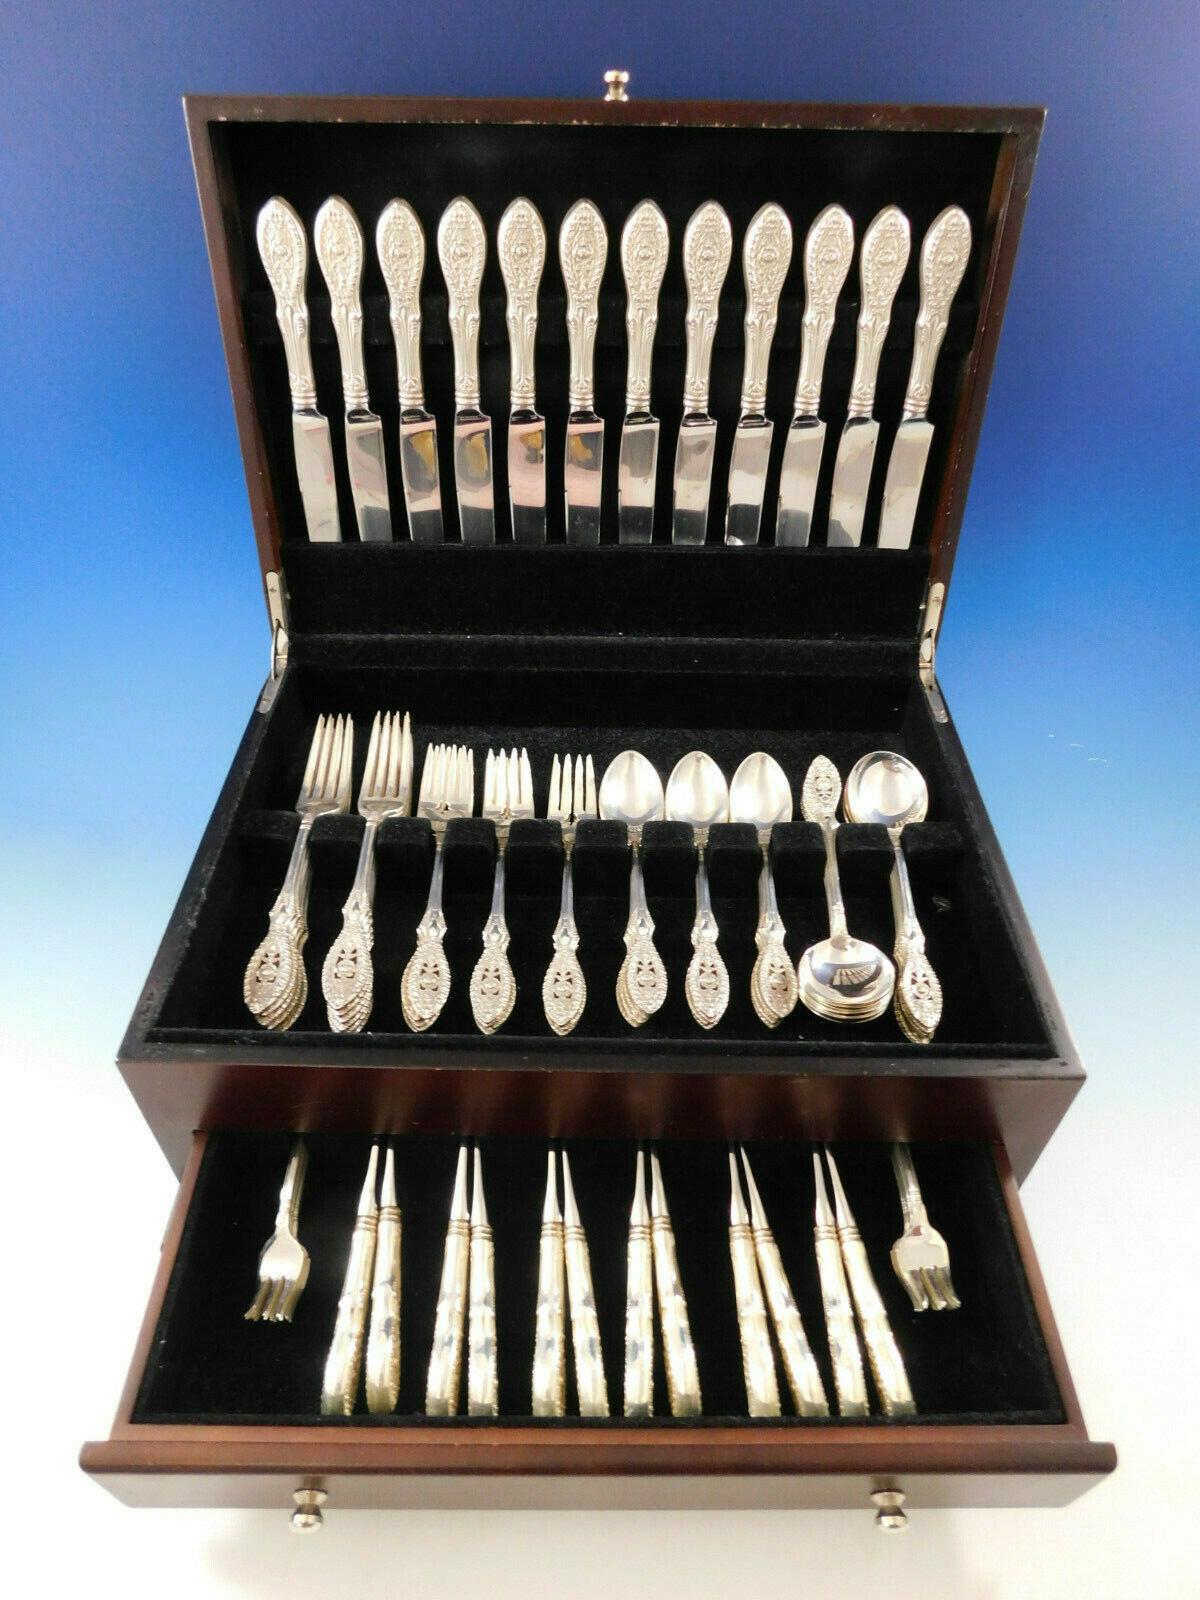 Valenciennes by Manchester sterling silver Flatware set with unique pierced handle with floral motif - 84 pieces. This set includes:

12 knives, french blade, 8 3/4